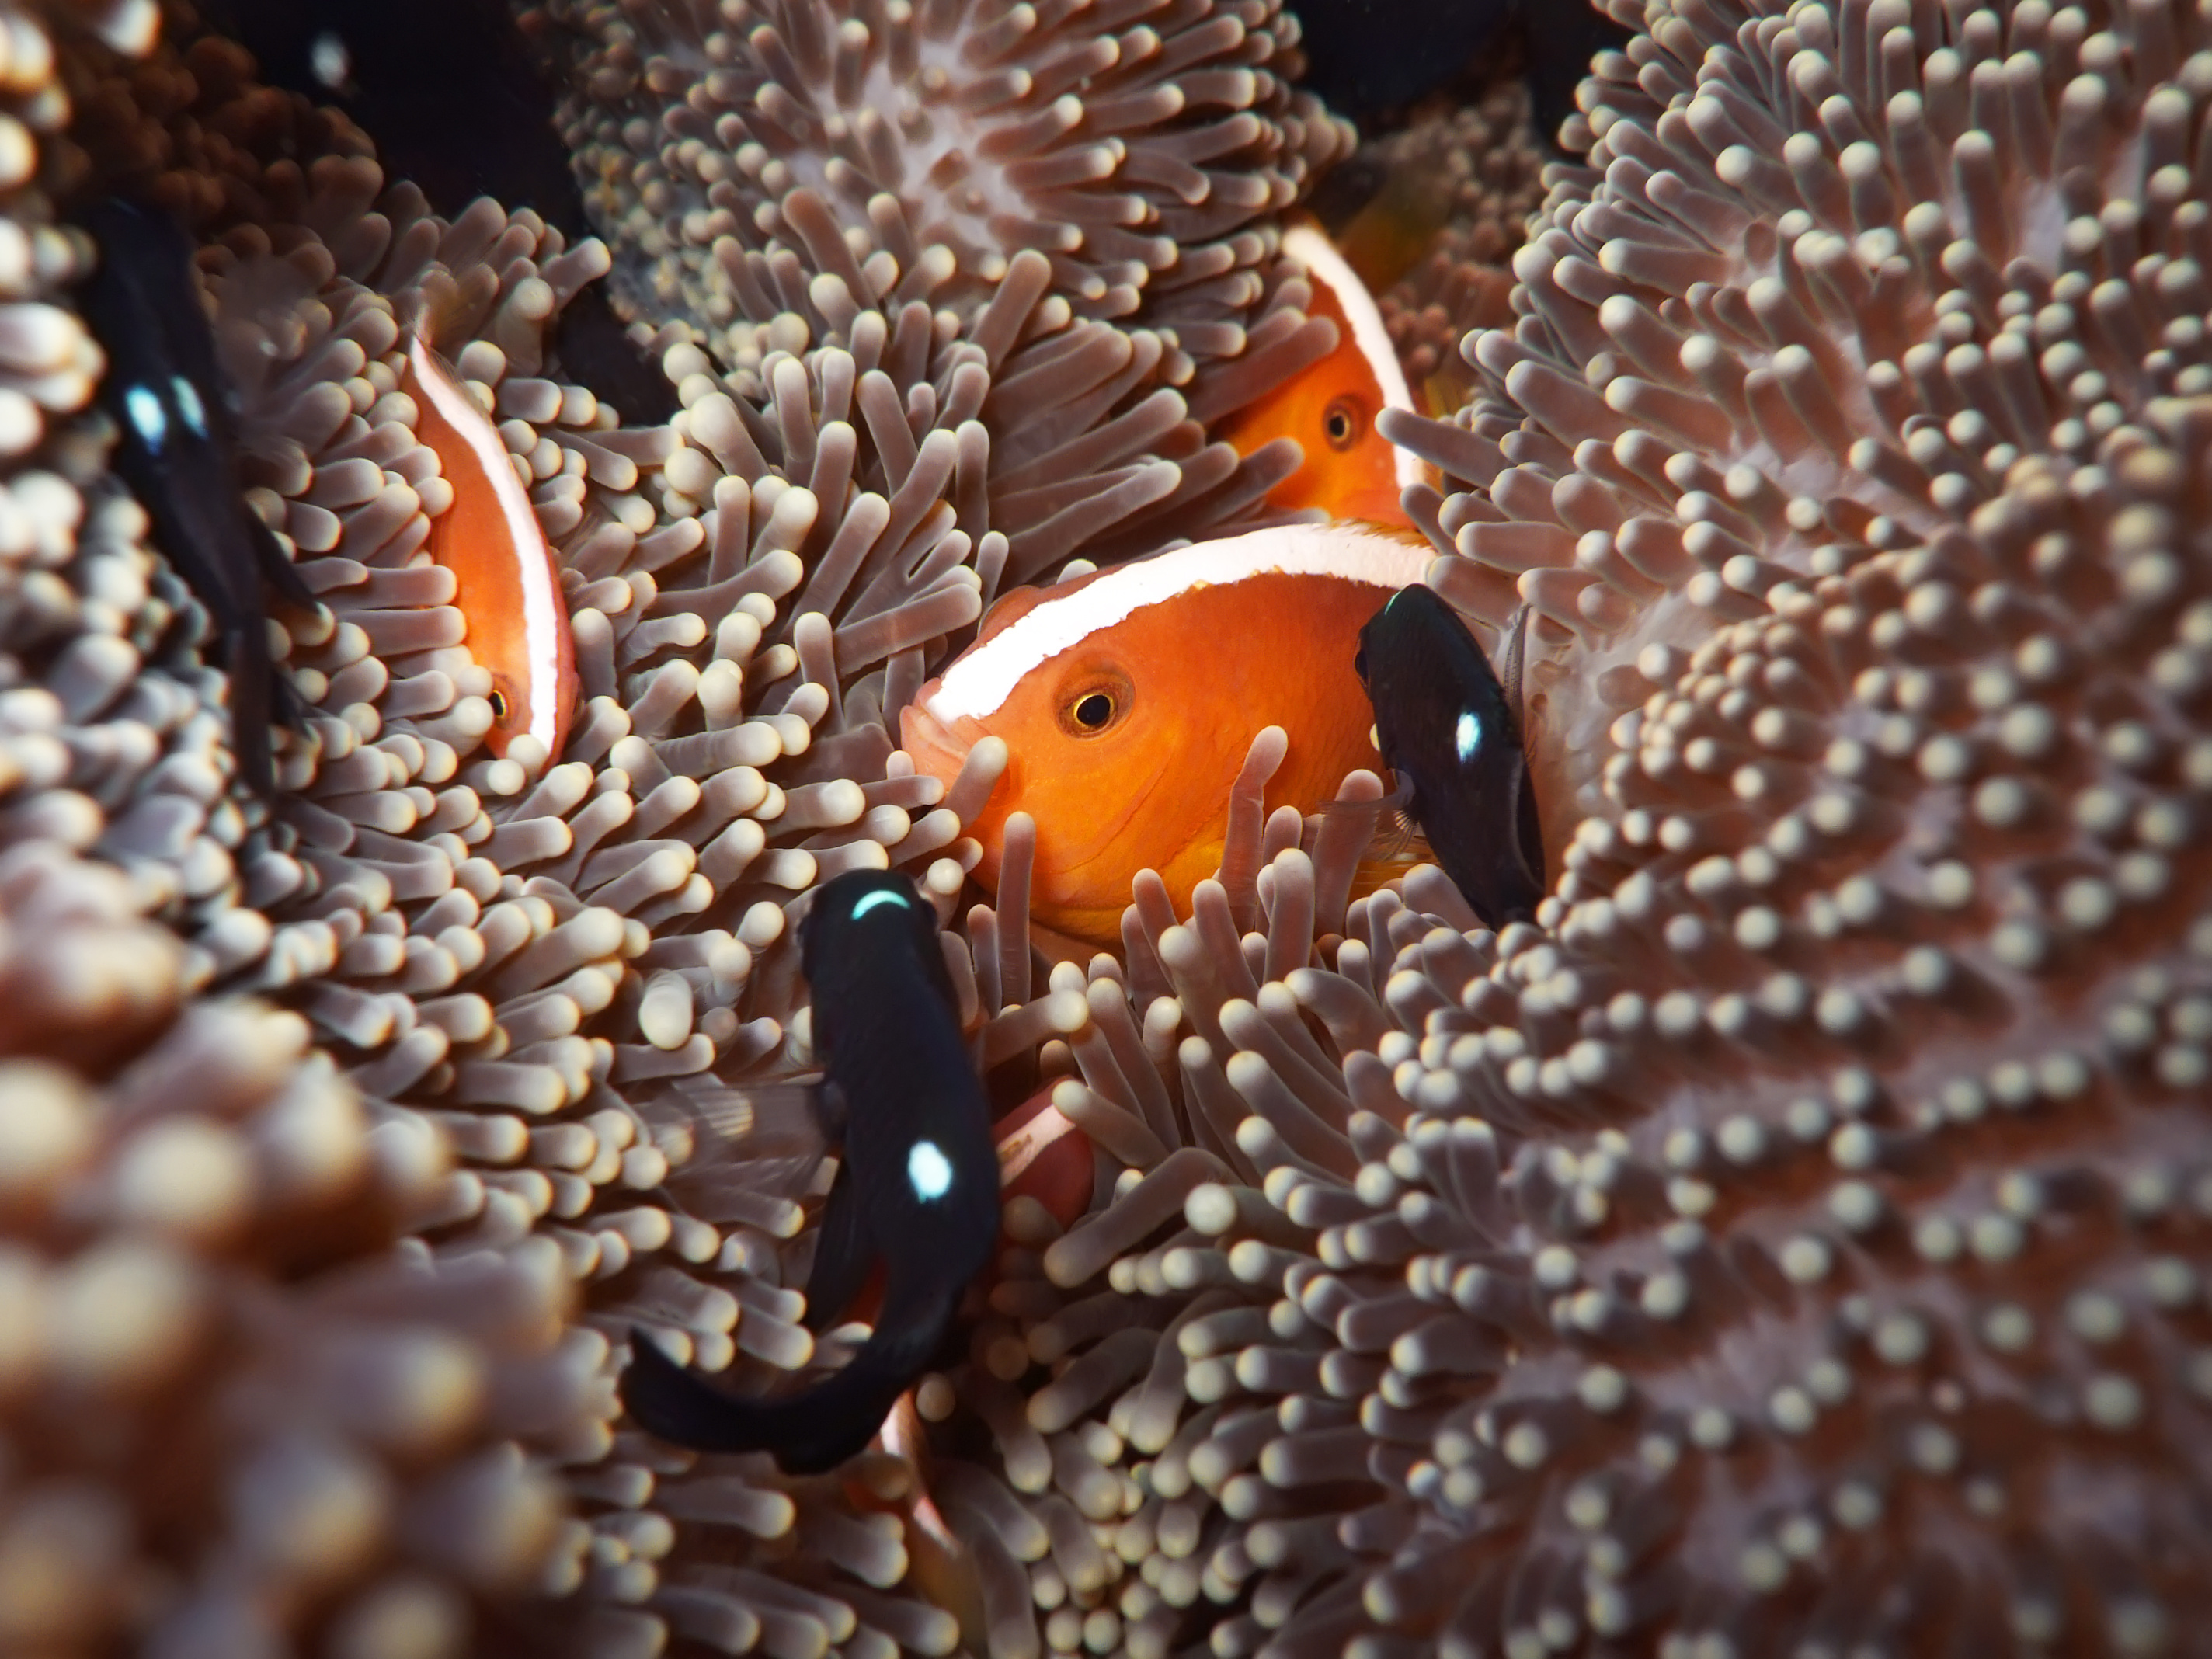 The Point at Agincourt Reef dive site in Australia provides perfect conditions for anemones and clownfish to live in harmony